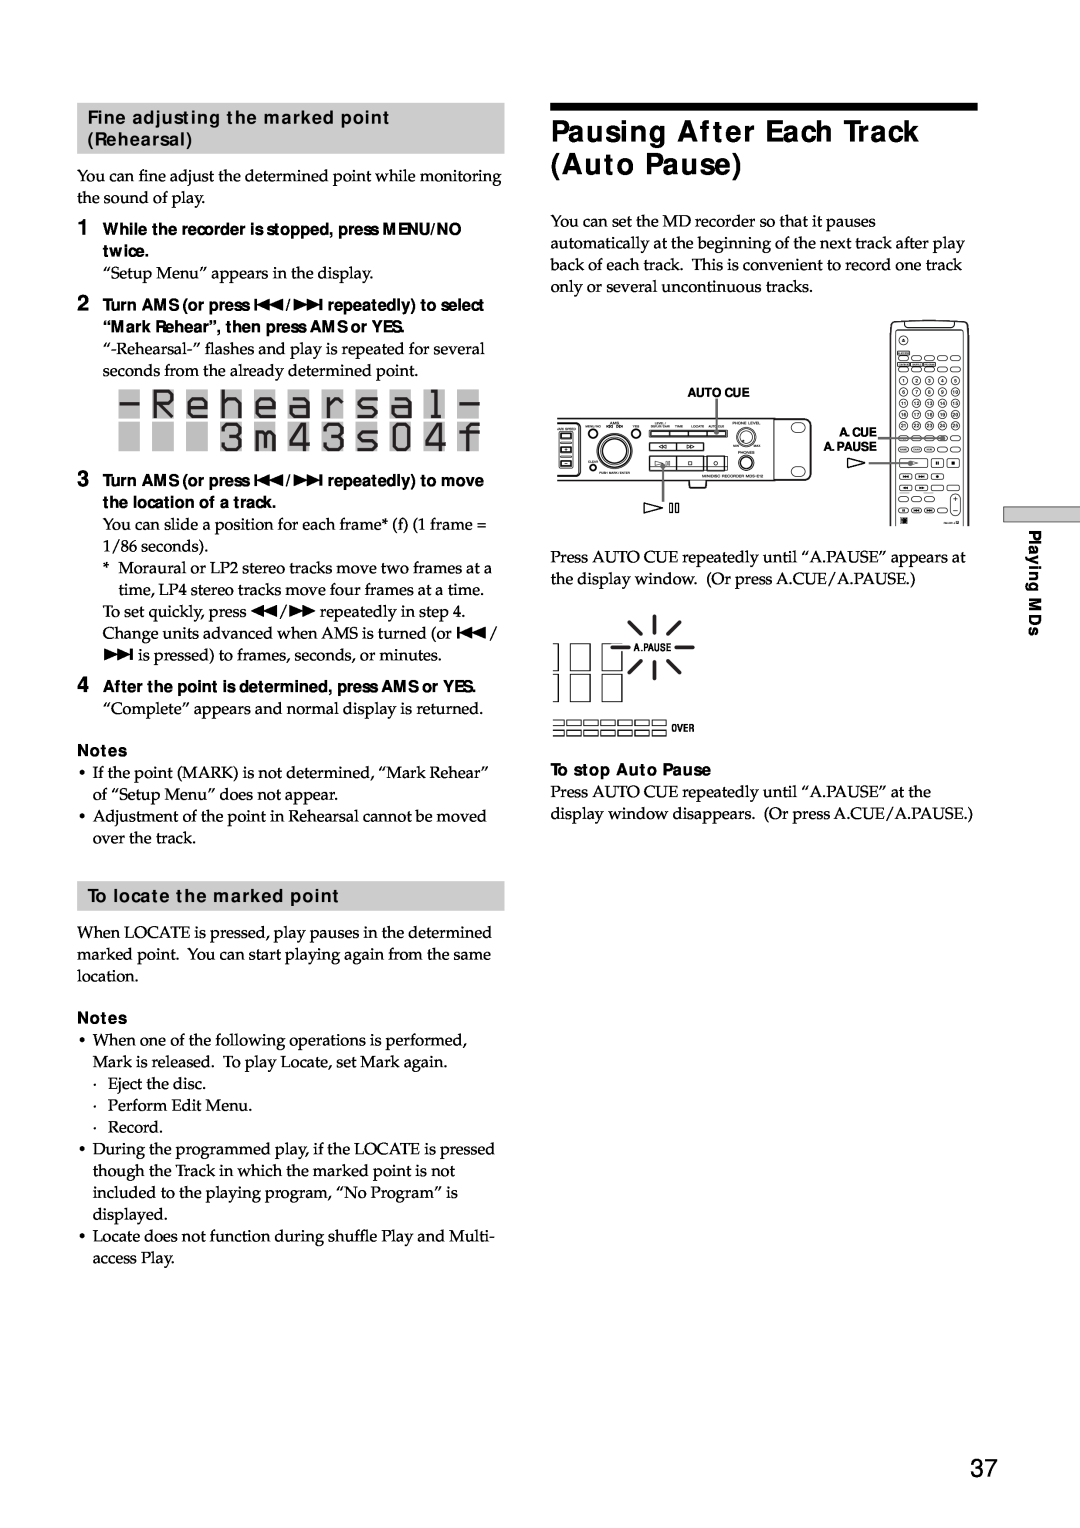 Sony MDS-E10 manual R e h e a r s a l, 3 m 4 3 s 0 4 f, Pausing After Each Track Auto Pause, To locate the marked point 